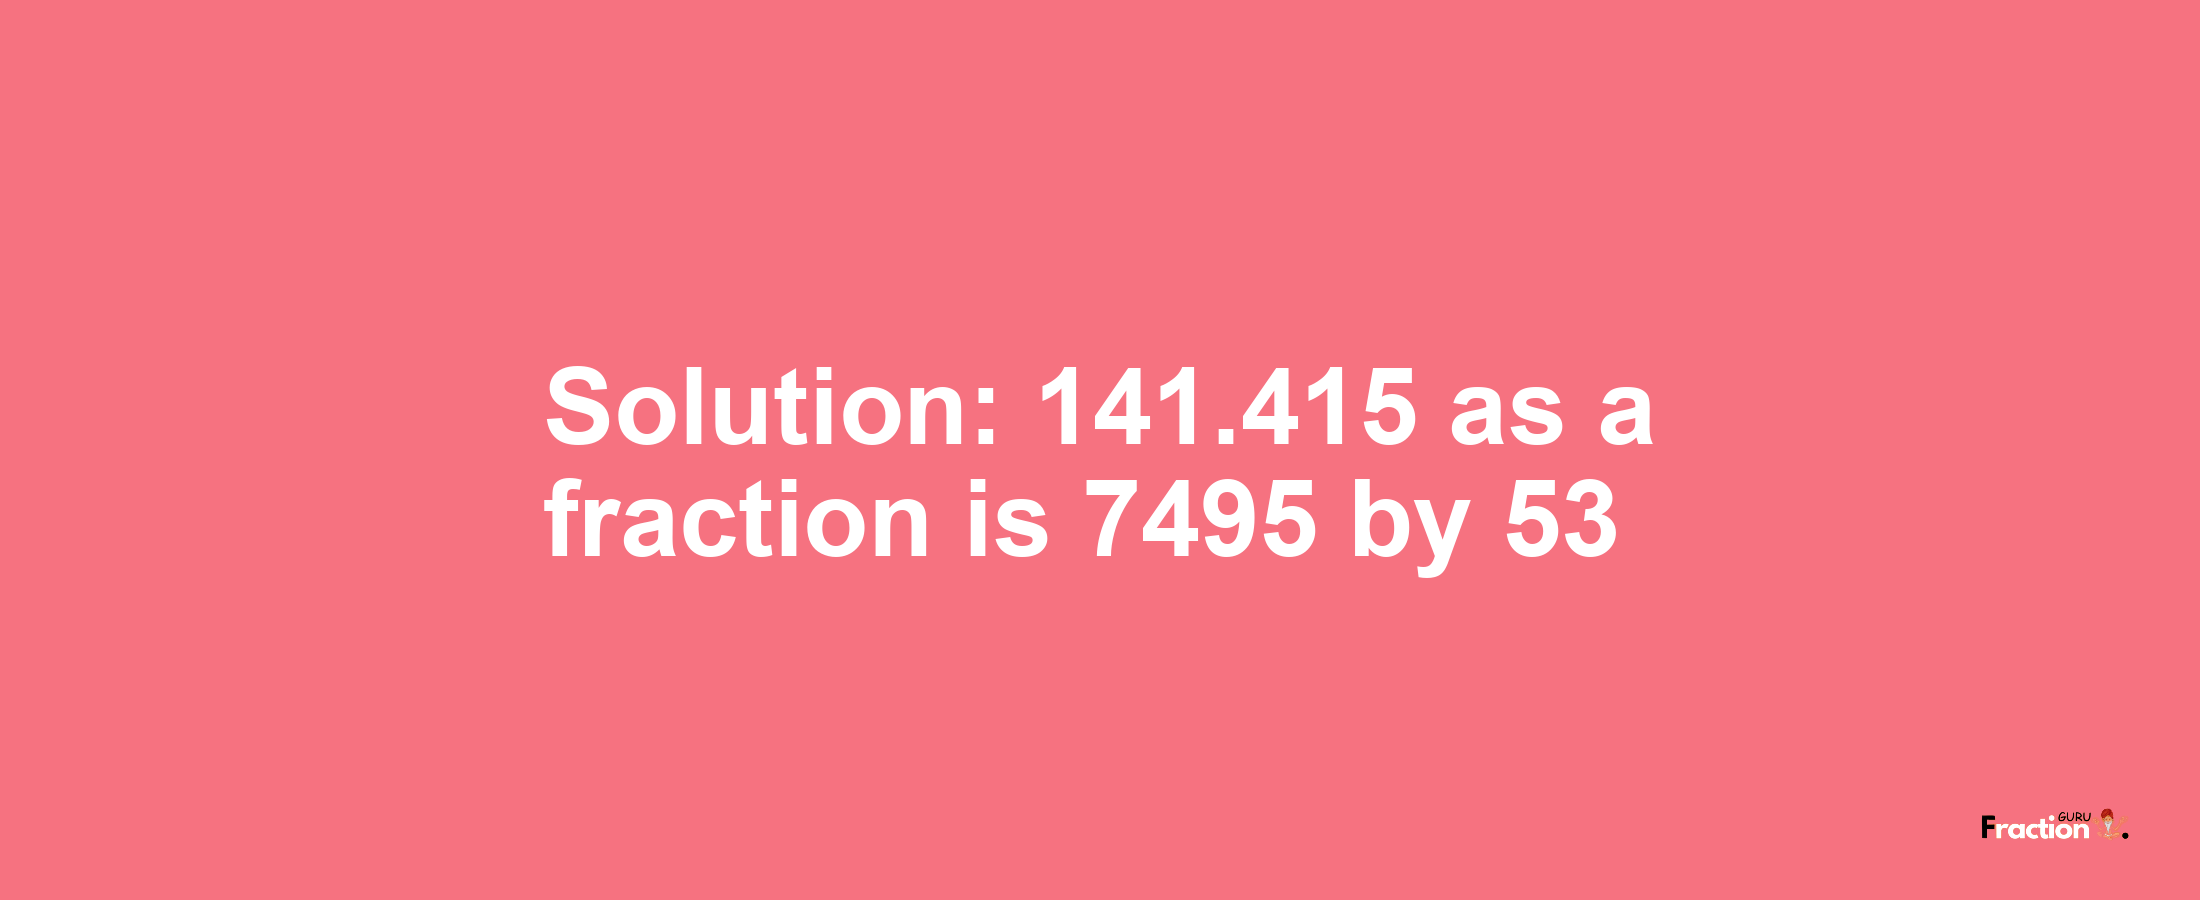 Solution:141.415 as a fraction is 7495/53